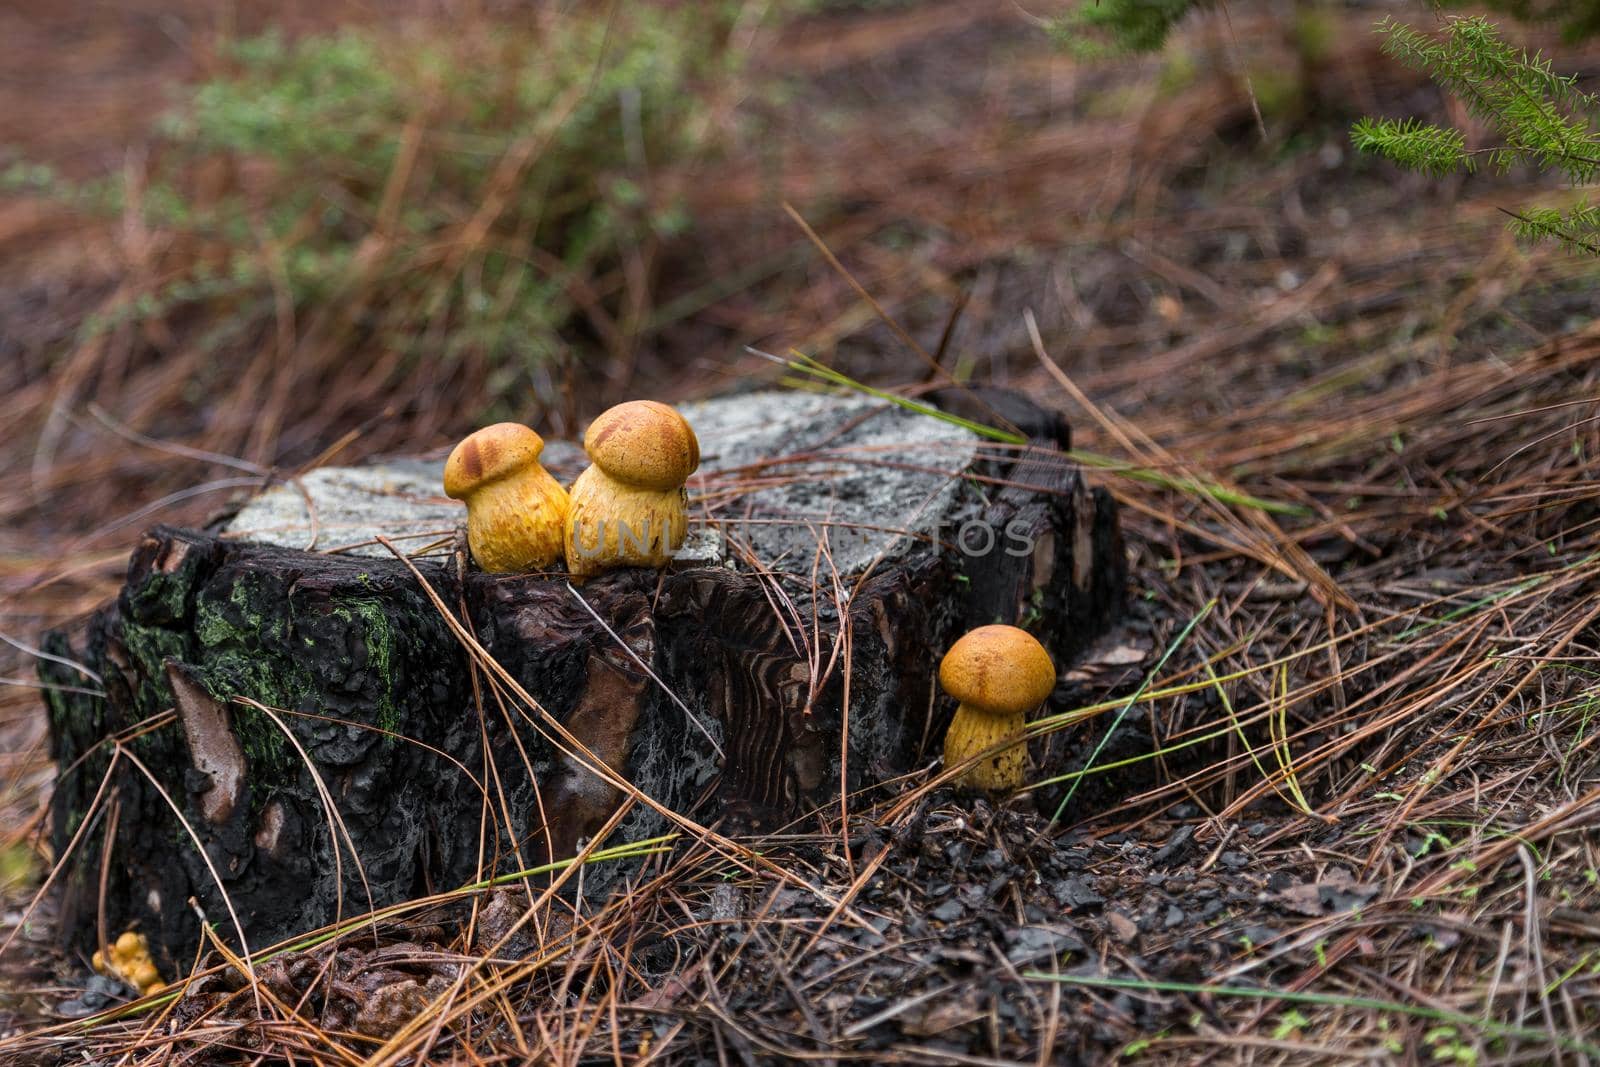 Group of poisonous inedible mushrooms on a stump among dry needles in the forest by apavlin